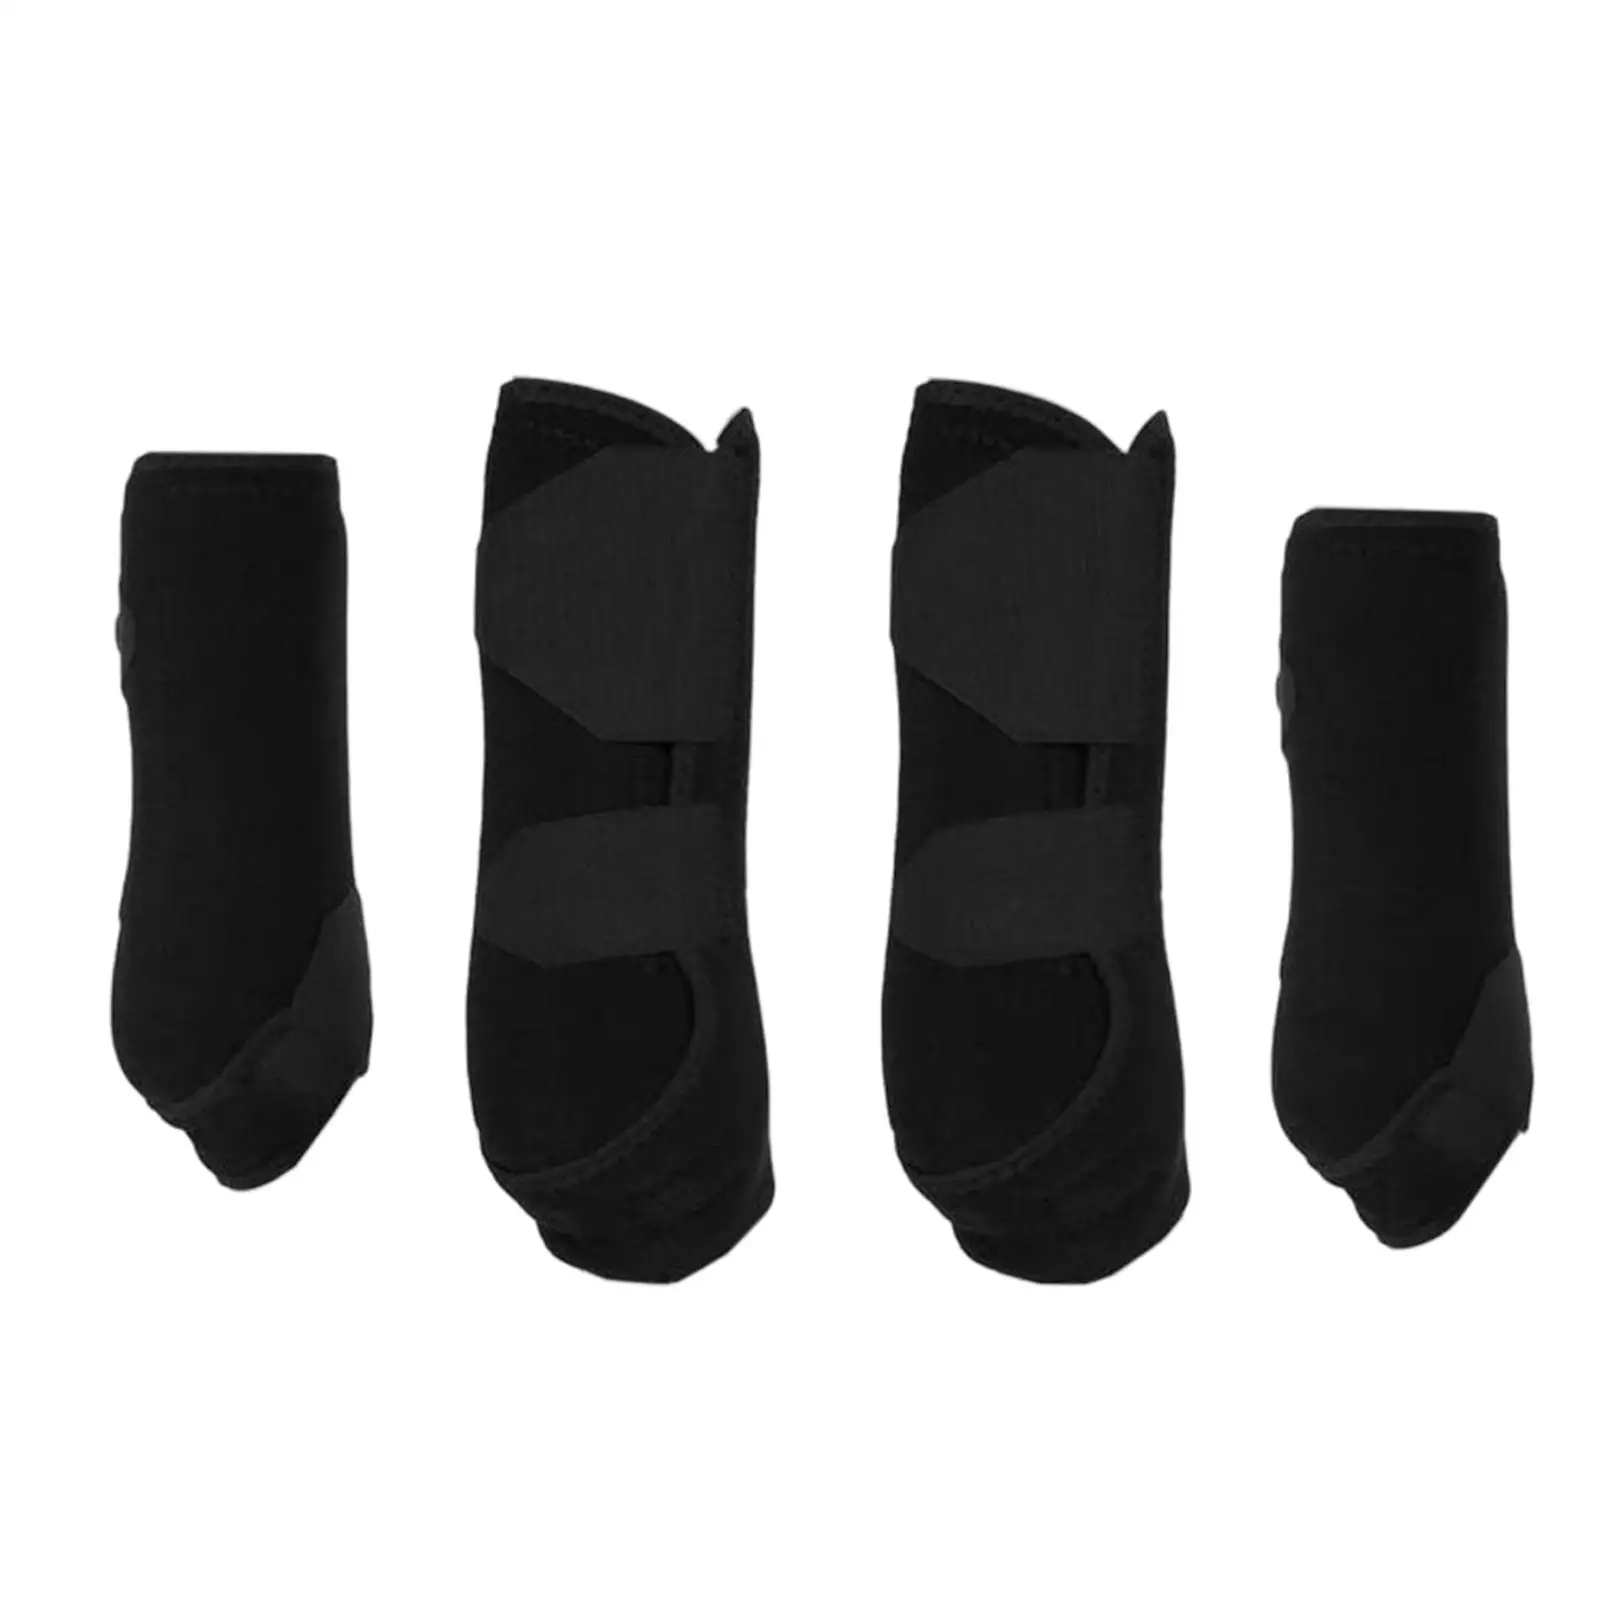 4Pcs Horse Boots Leg Protection Wraps Tendon Protection Shockproof Protector